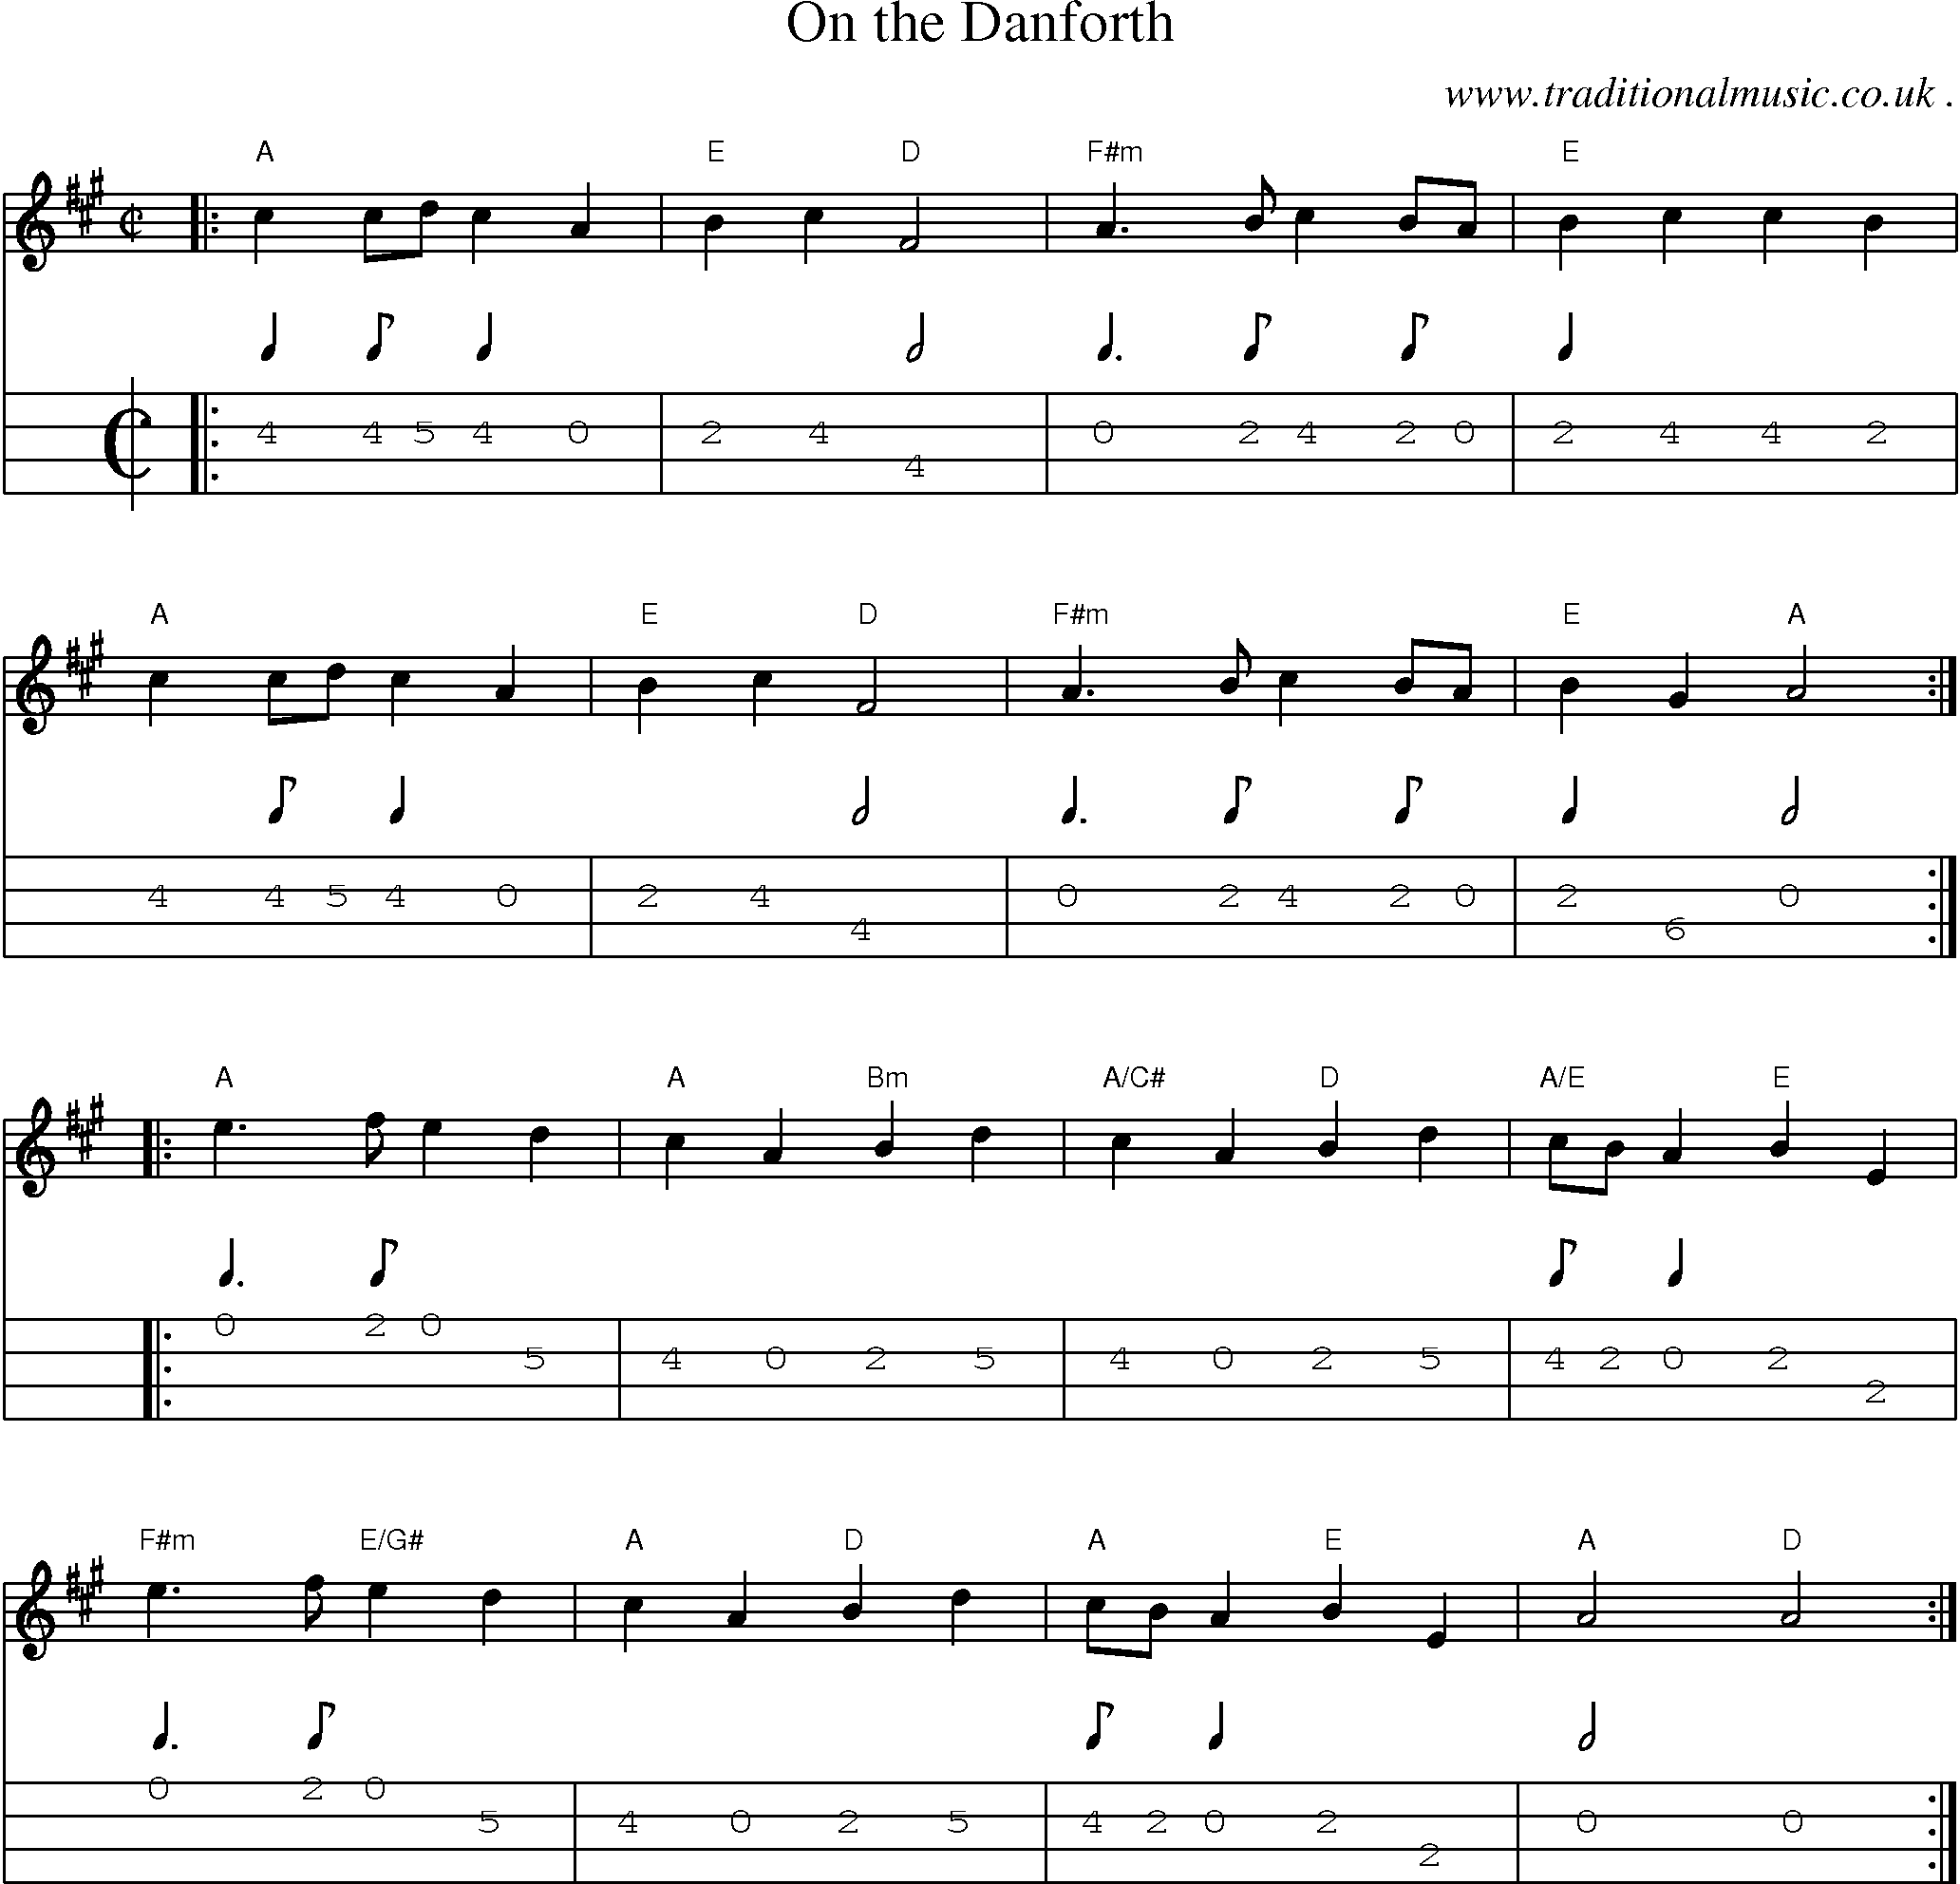 Music Score and Guitar Tabs for On The Danforth